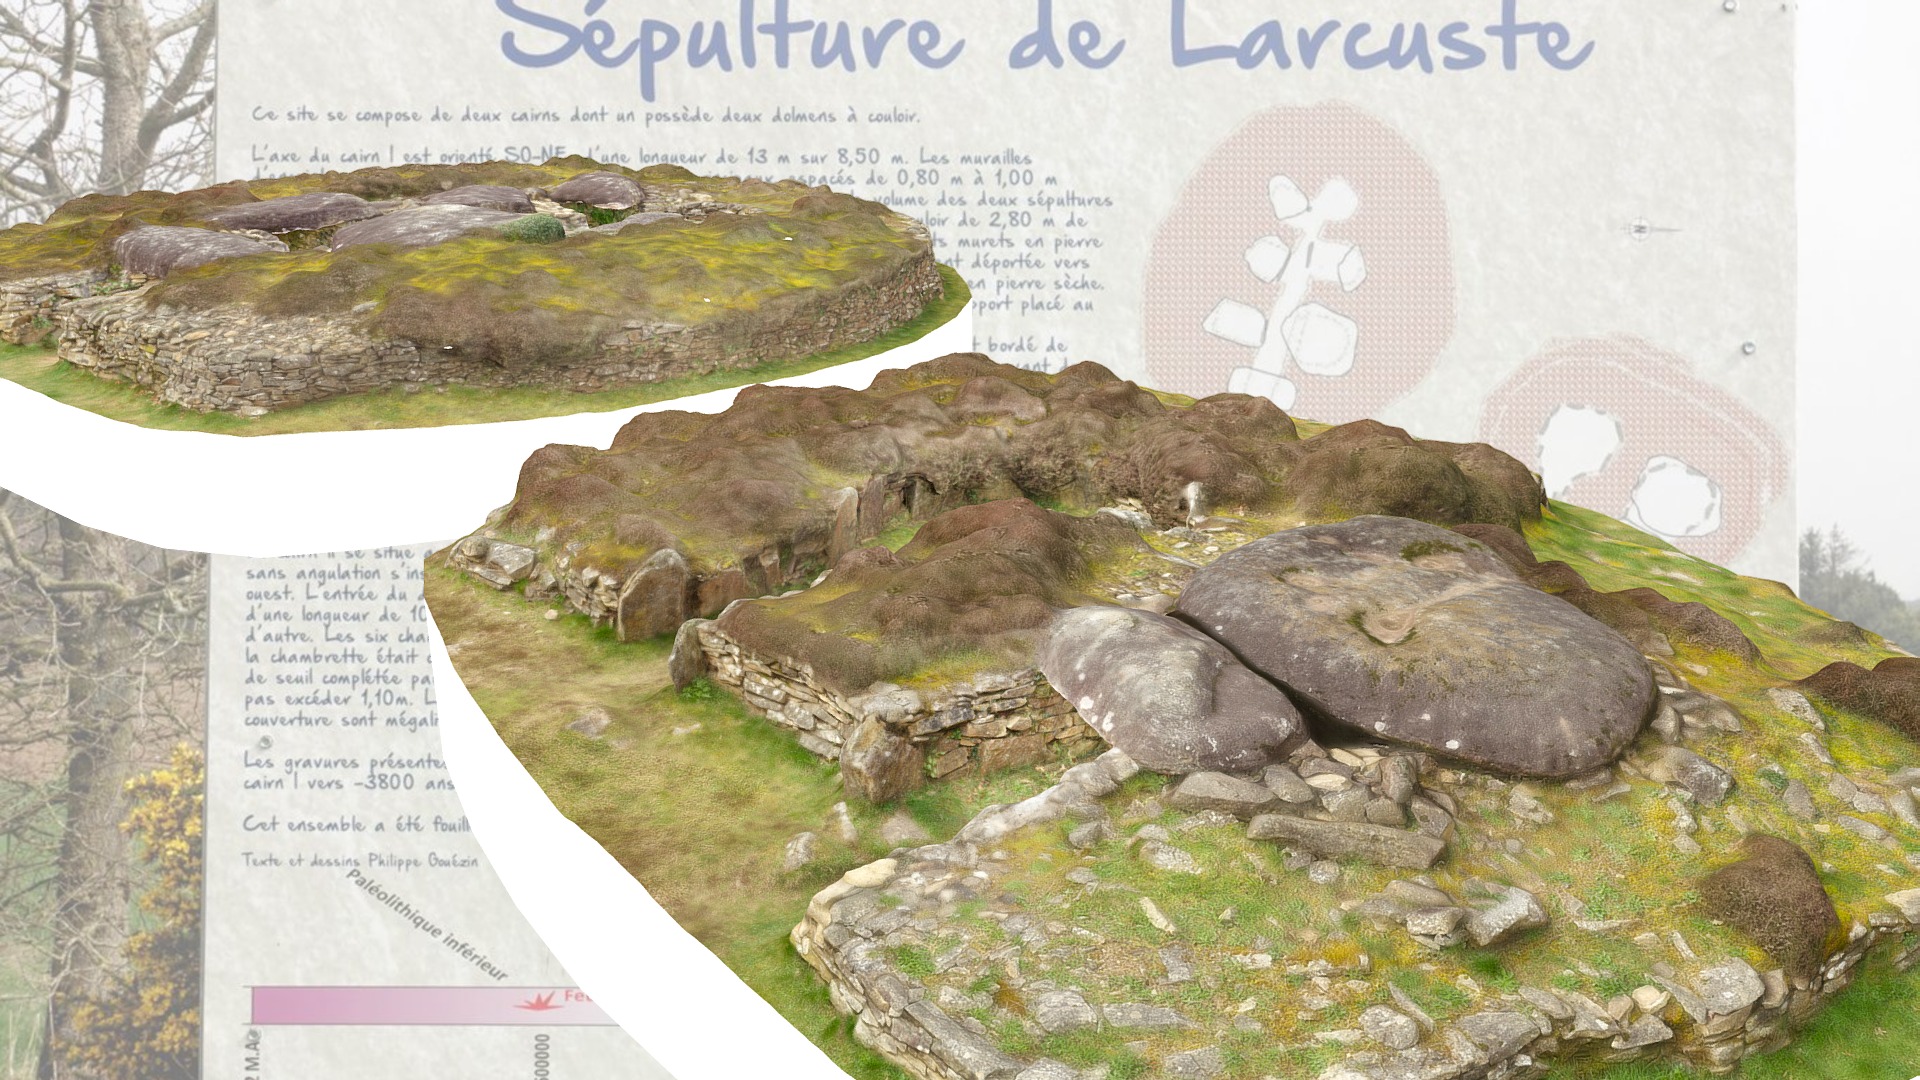 3D model Larcuste’s cairns – Colpo – Morbihan – France - This is a 3D model of the Larcuste's cairns - Colpo - Morbihan - France. The 3D model is about a sign with a picture of a turtle on a rock.